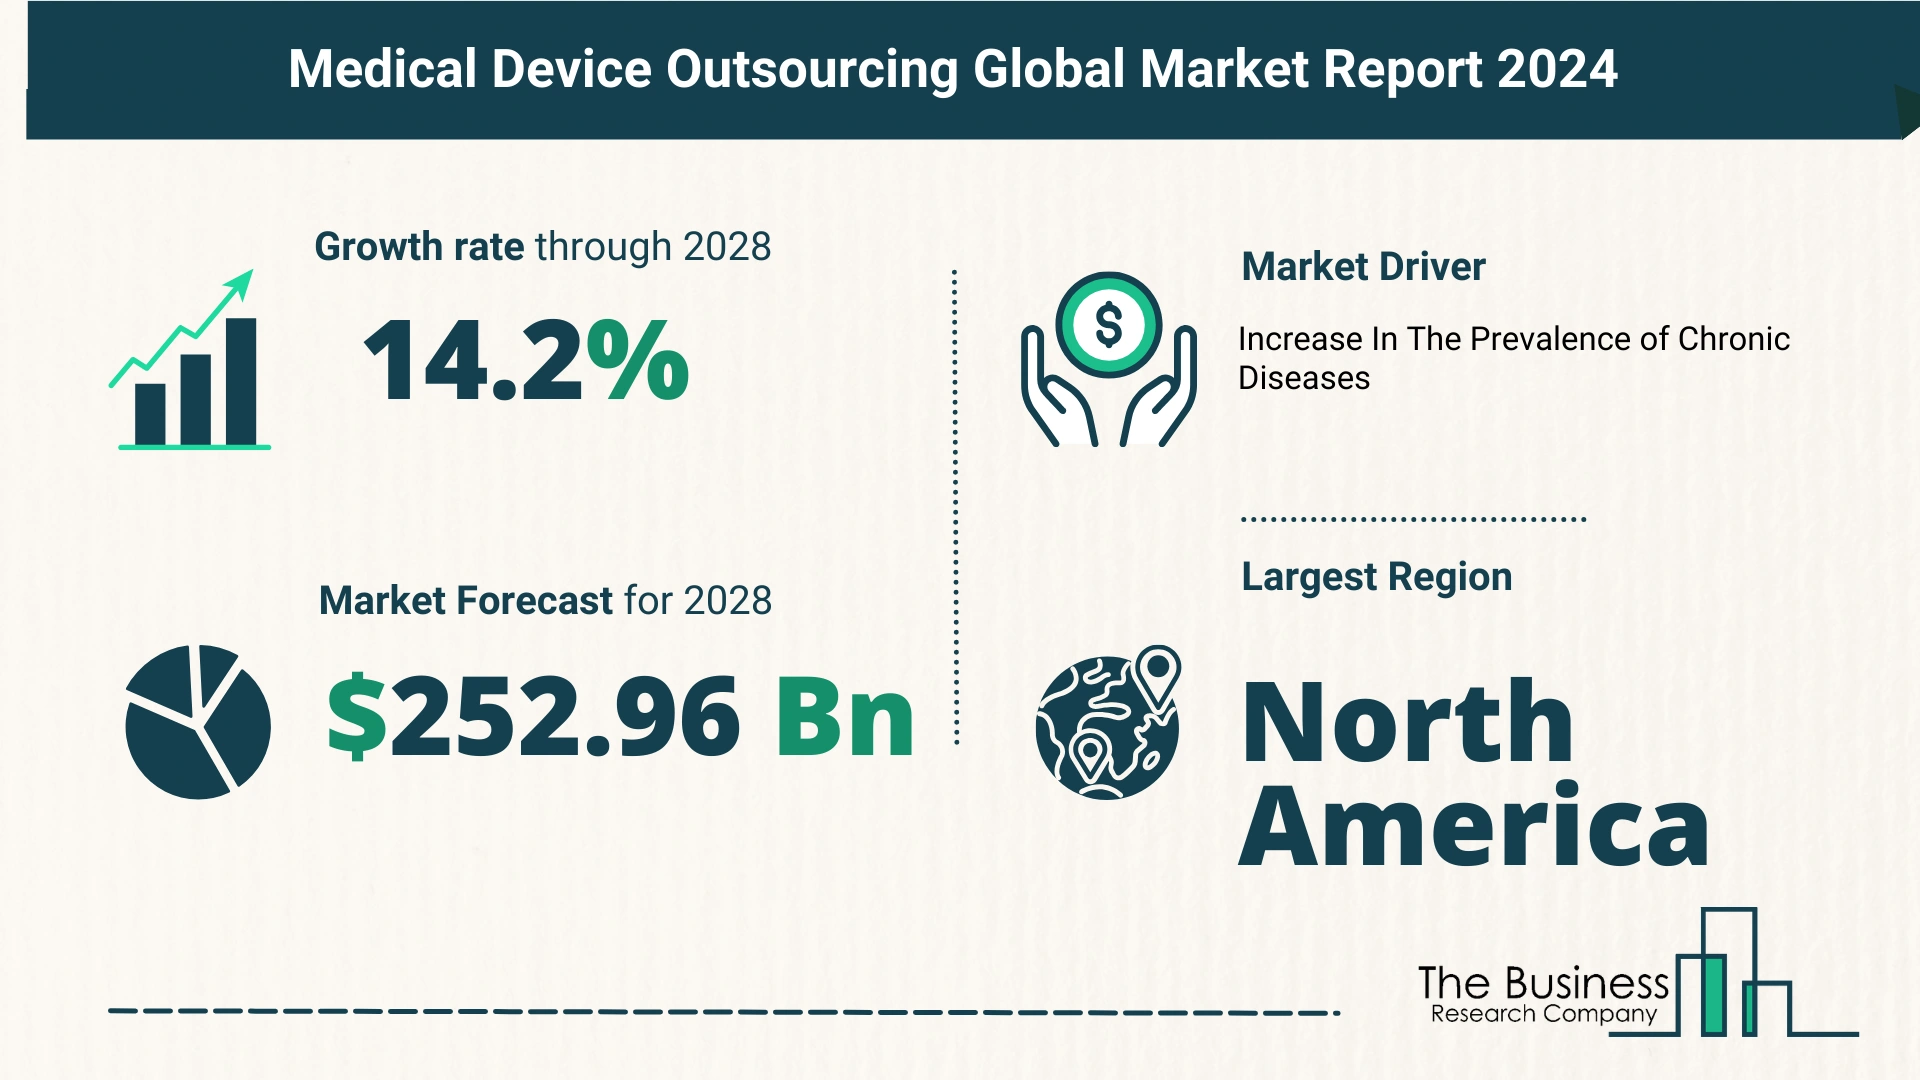 Global Medical Device Outsourcing Market Size